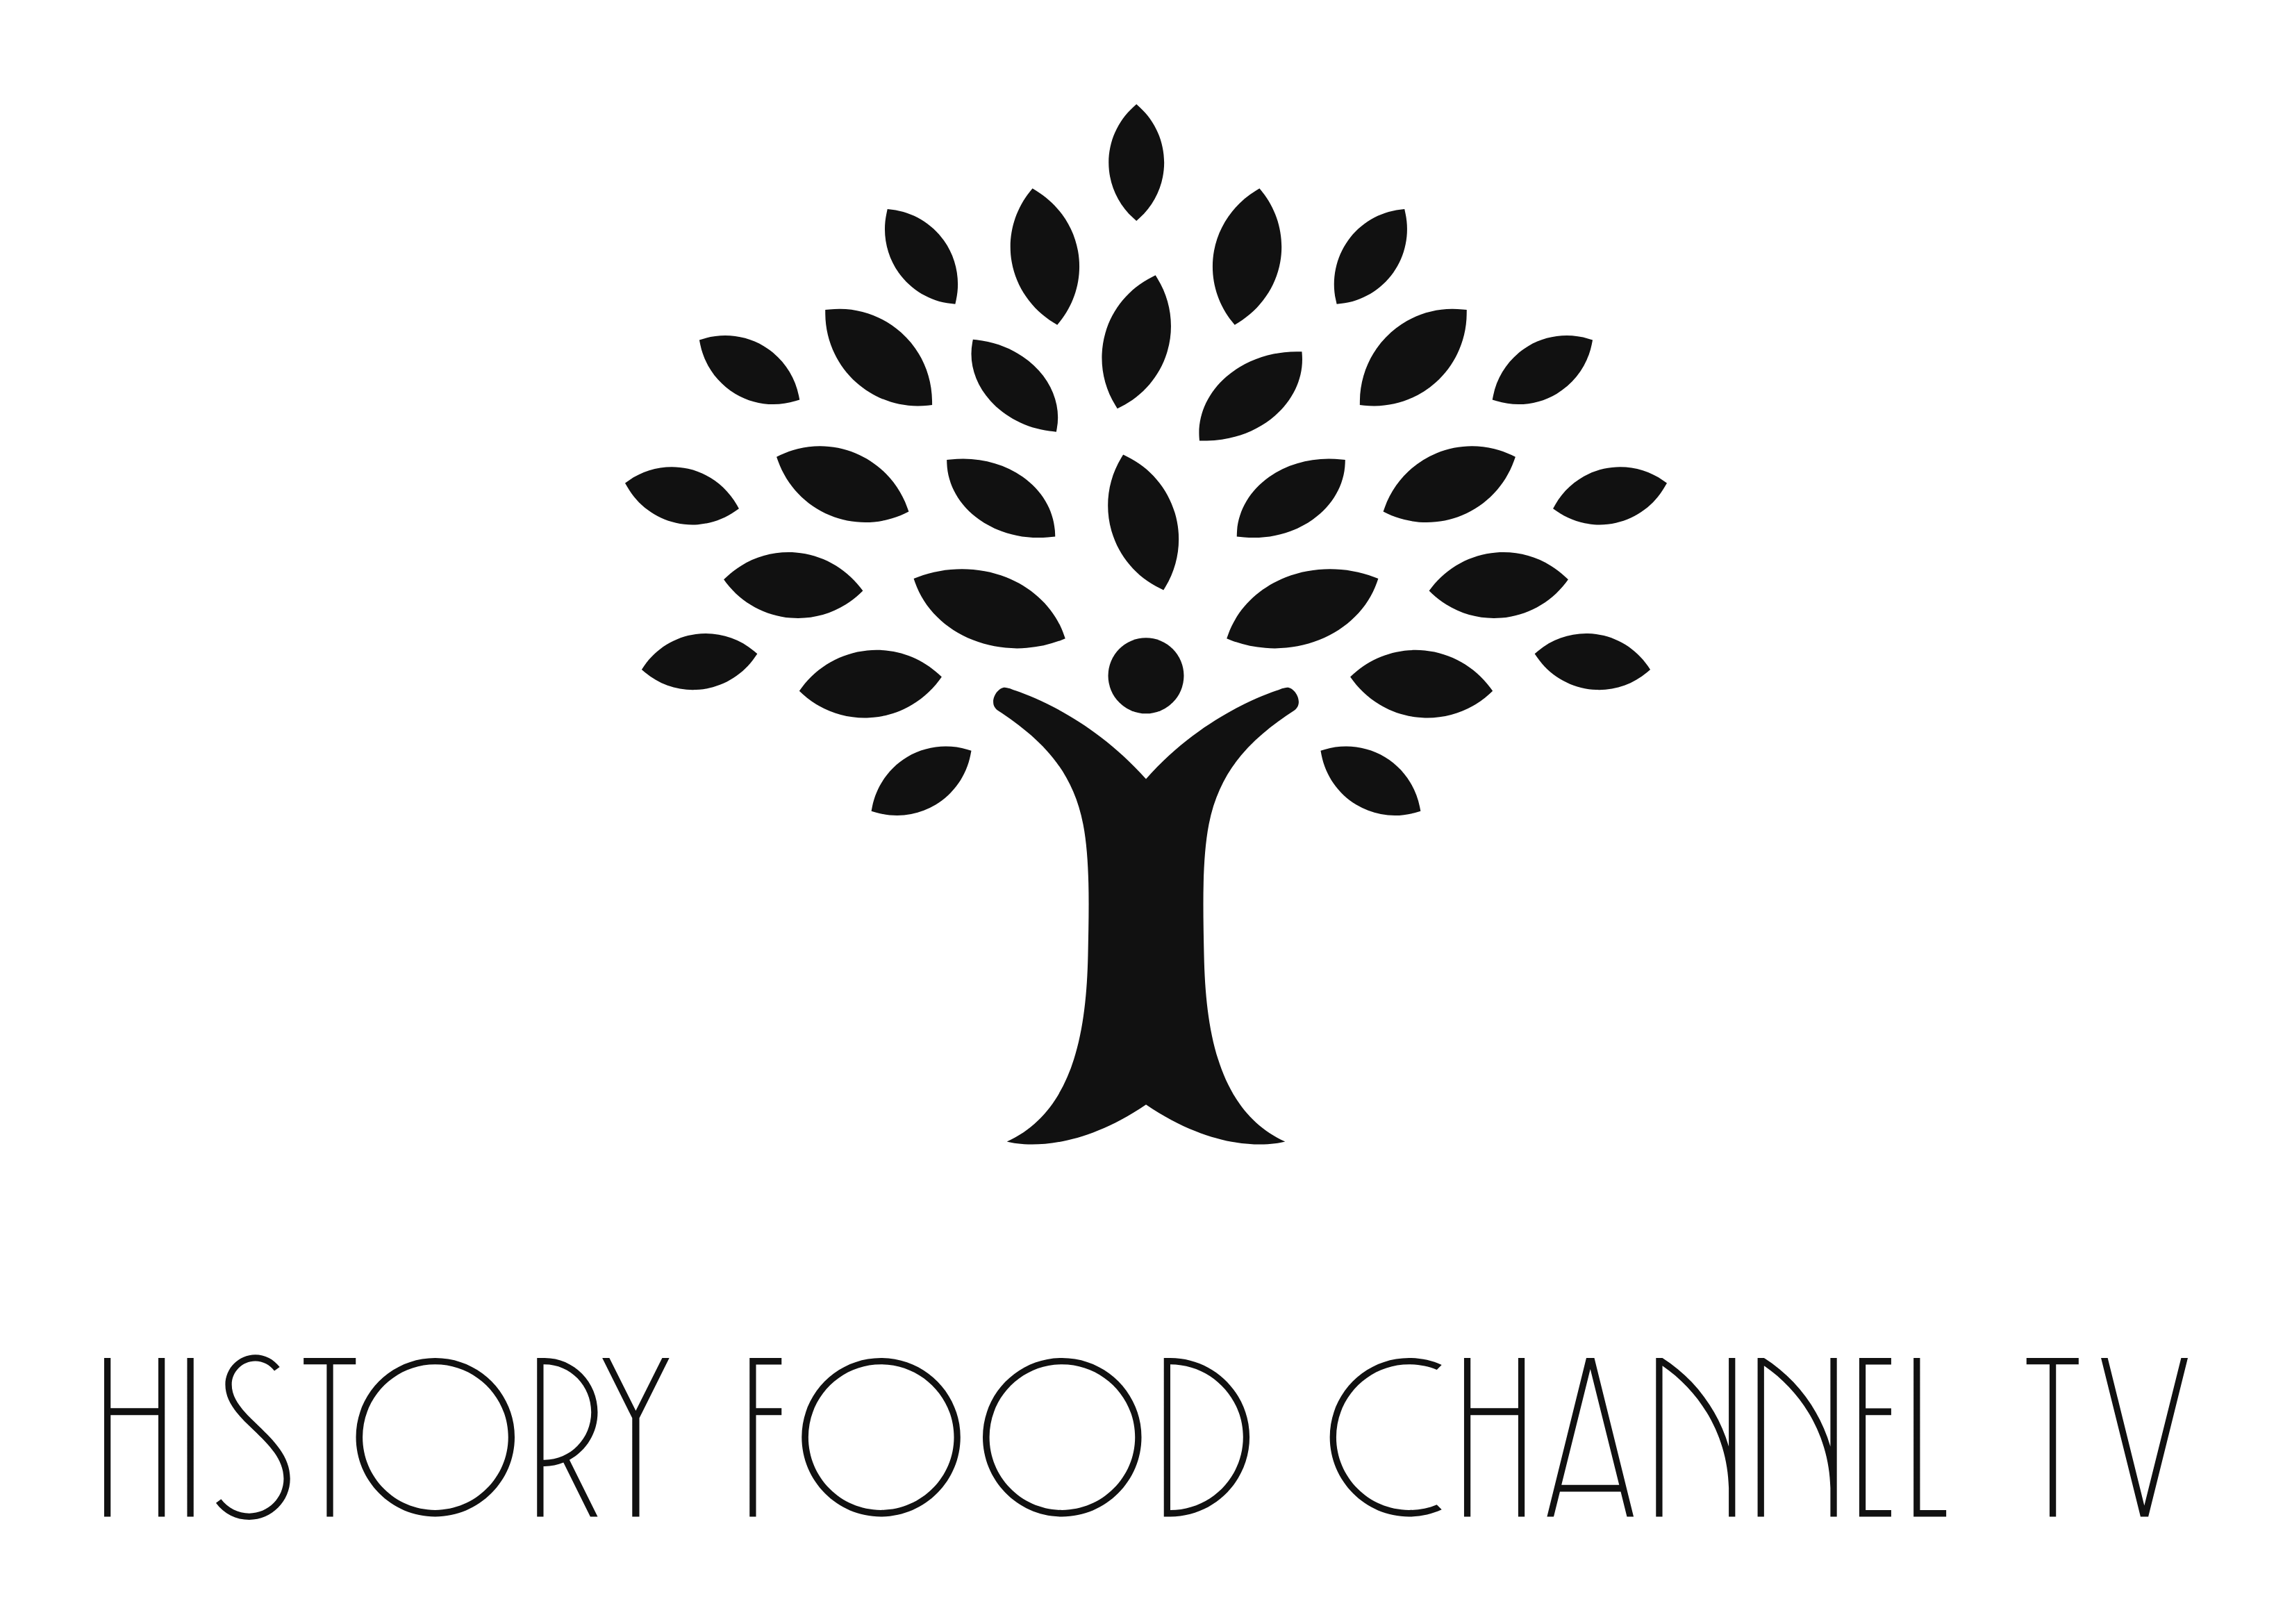 History Food Channel TV